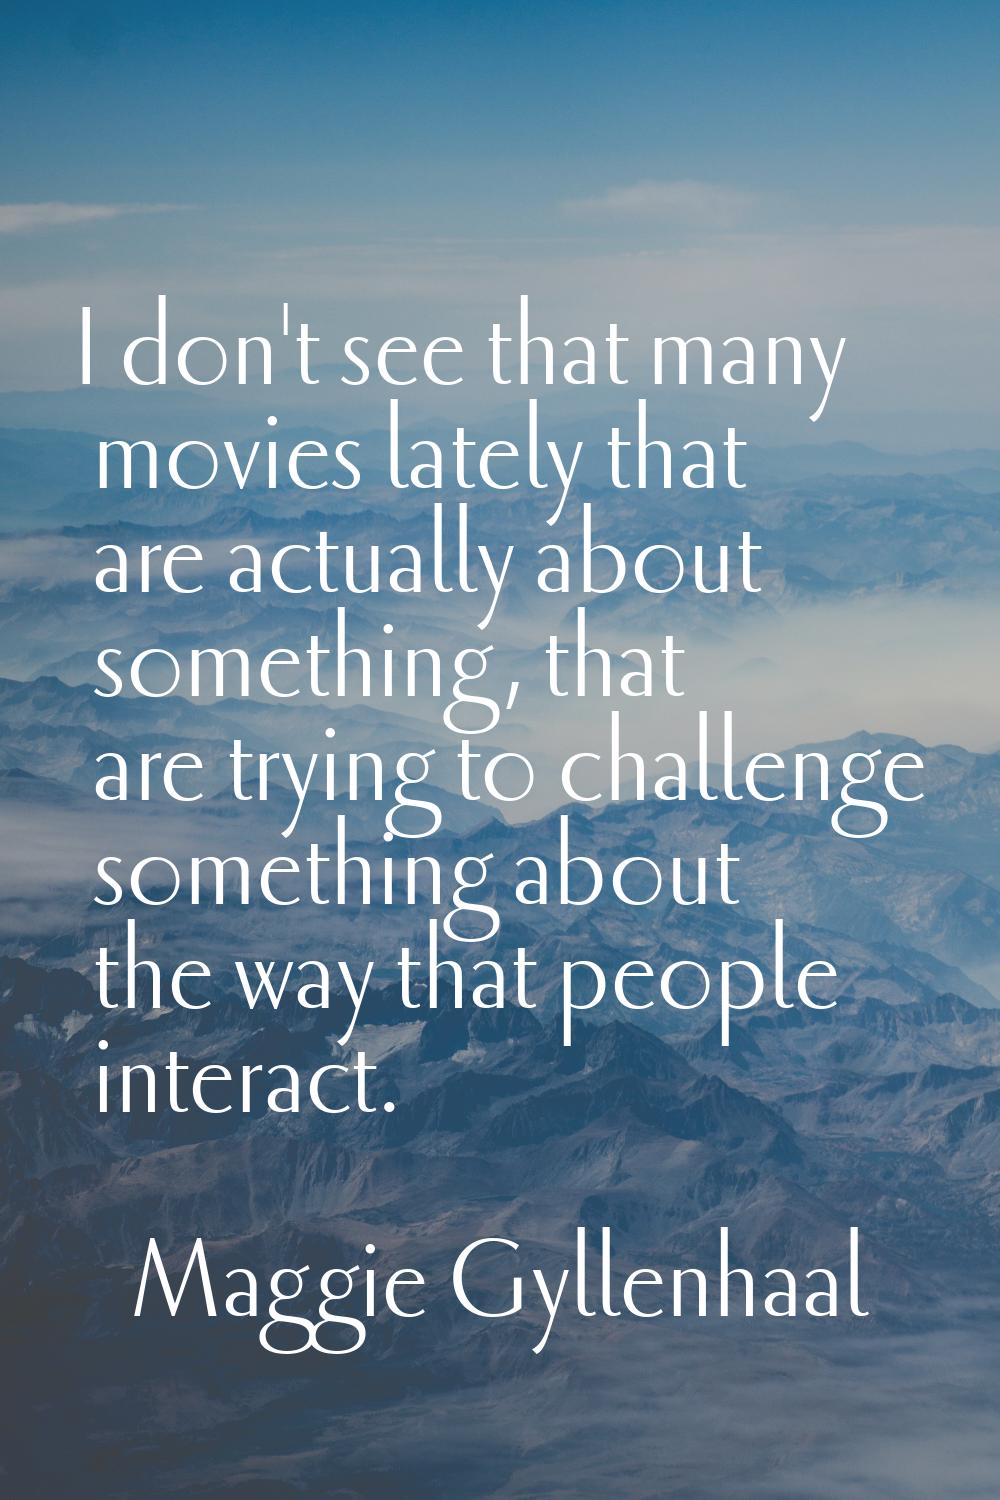 I don't see that many movies lately that are actually about something, that are trying to challenge